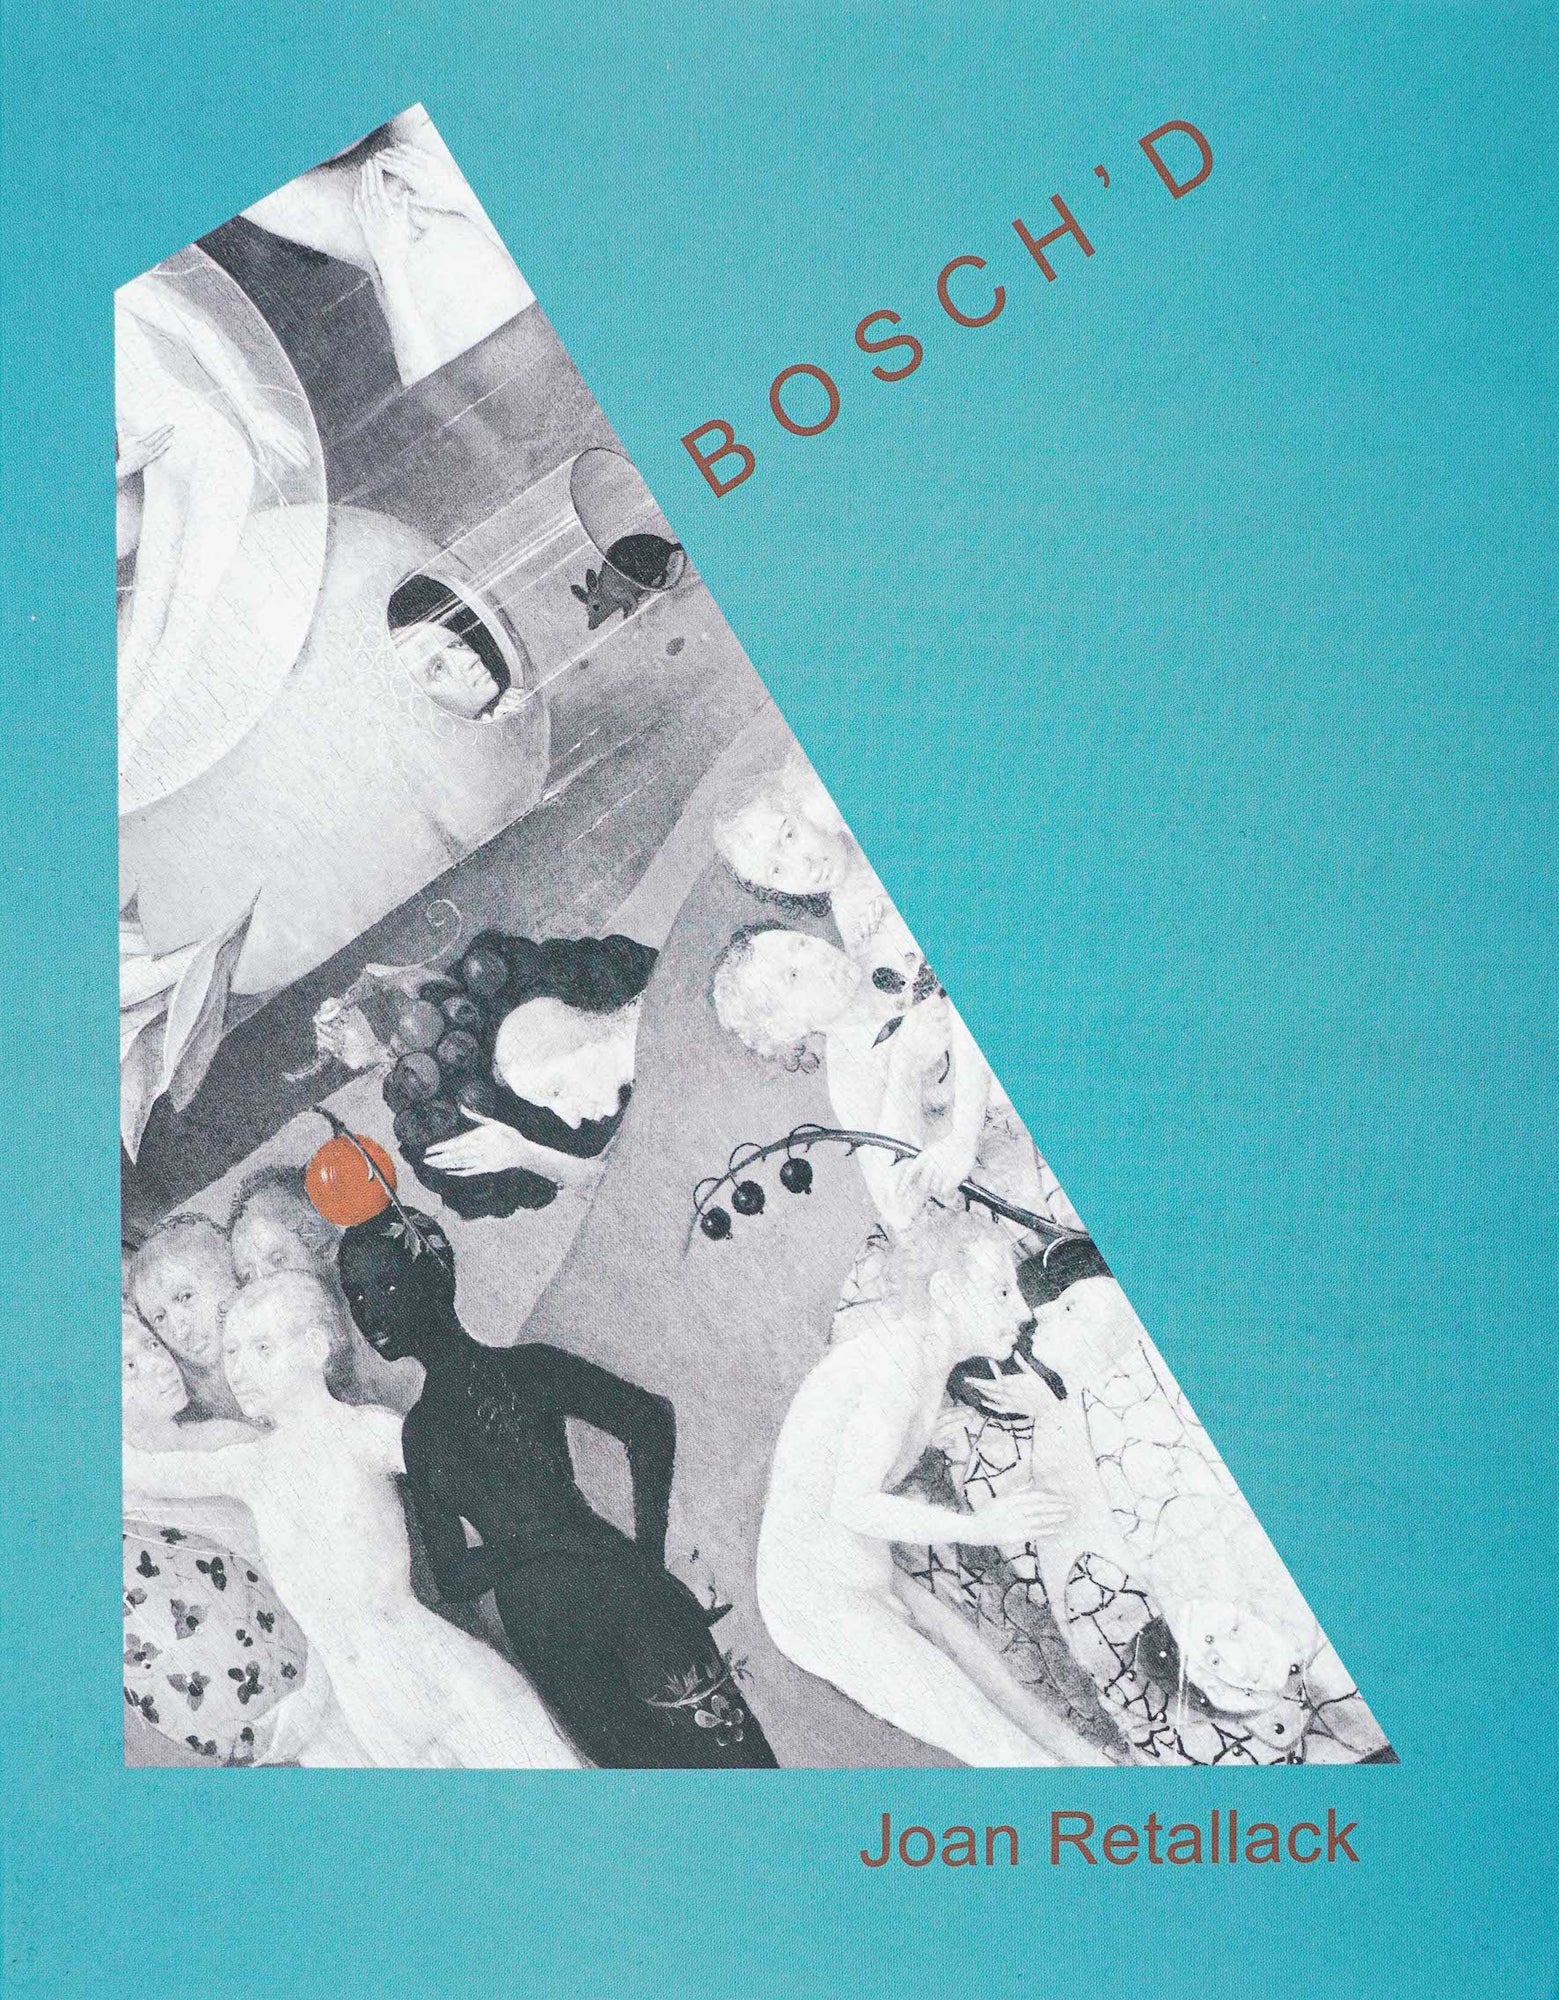 Turquoise cover with the title and author written out in dark orange, which corresponds to an apple in the otherwise black and white detail of Hieronimus Bosch's Garden of Earthly Delights that takes up around half of the page.